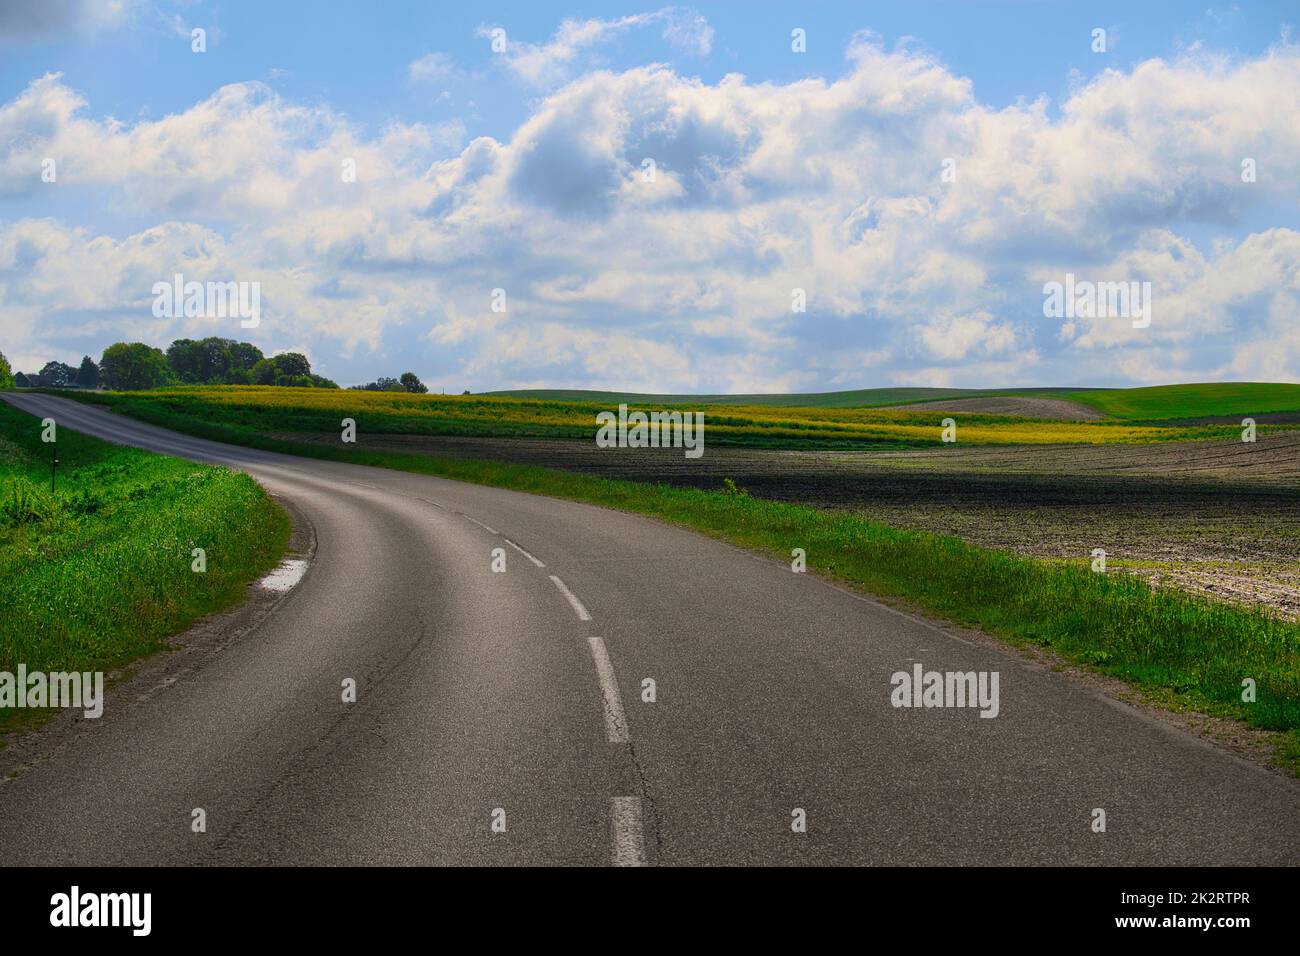 Road through picturesque countryside landscape Stock Photo